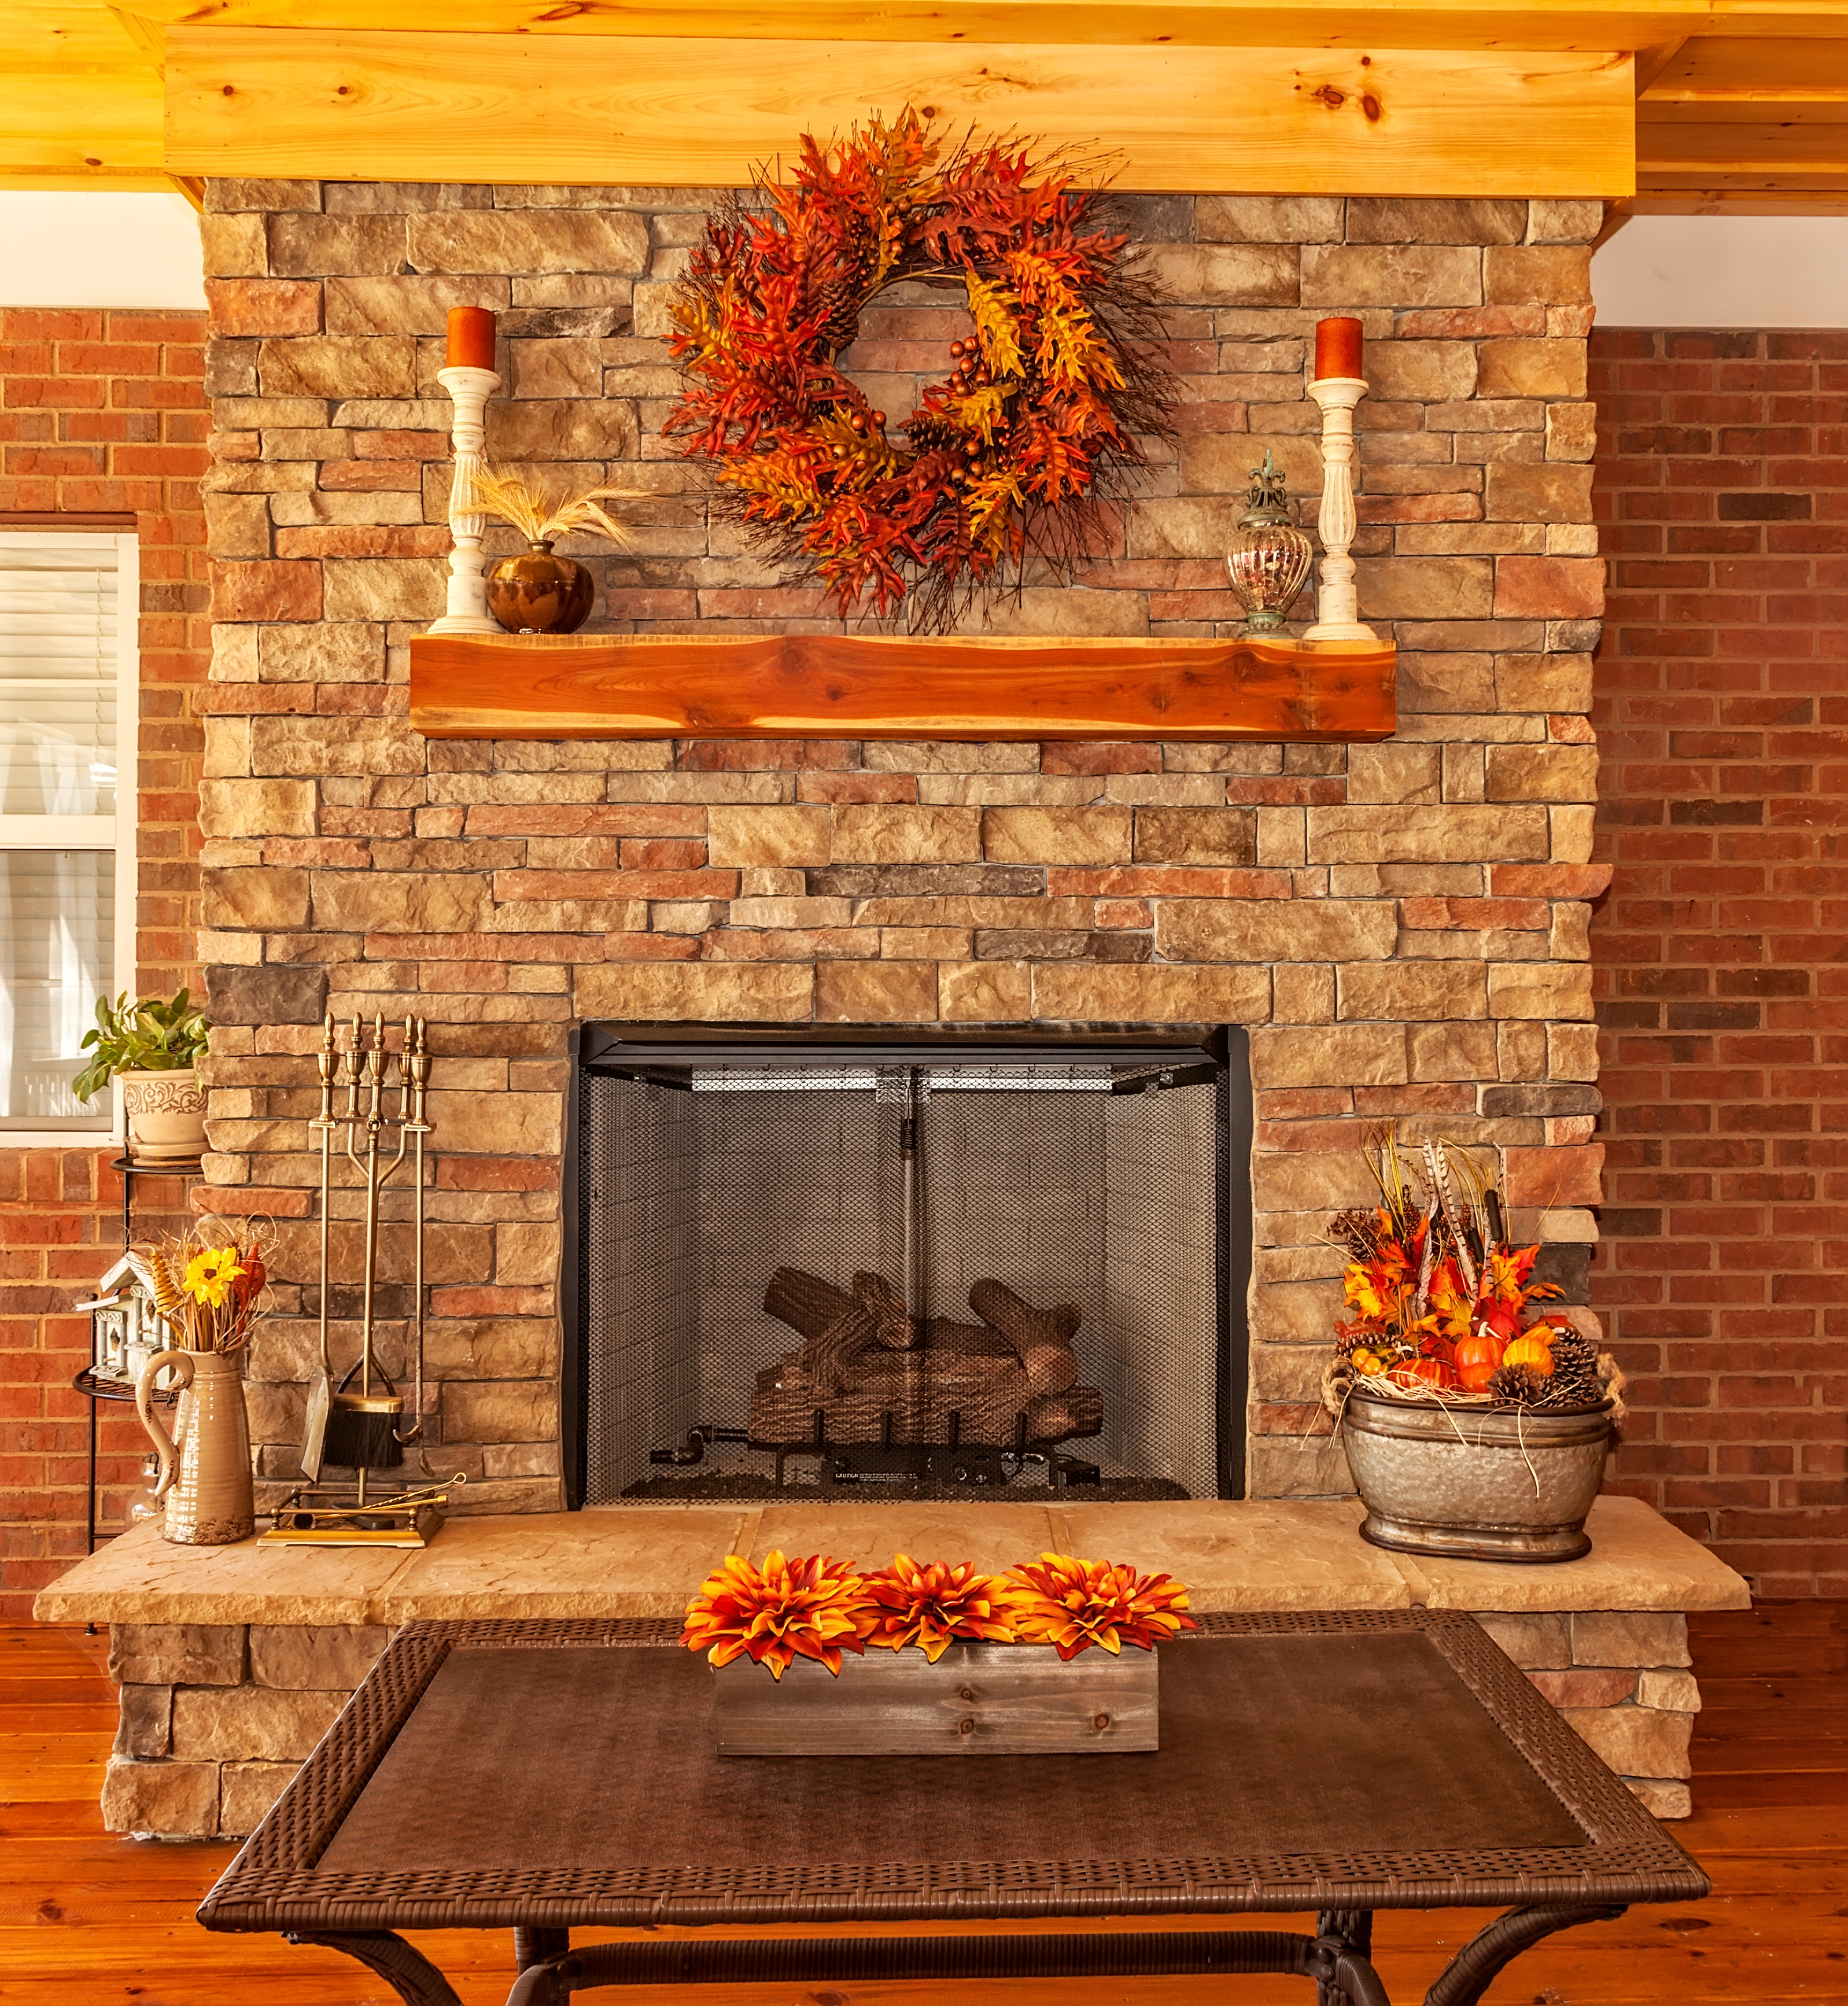 5 Fall Mantel Decorating Ideas That'll Make You Look Like a Pro 74